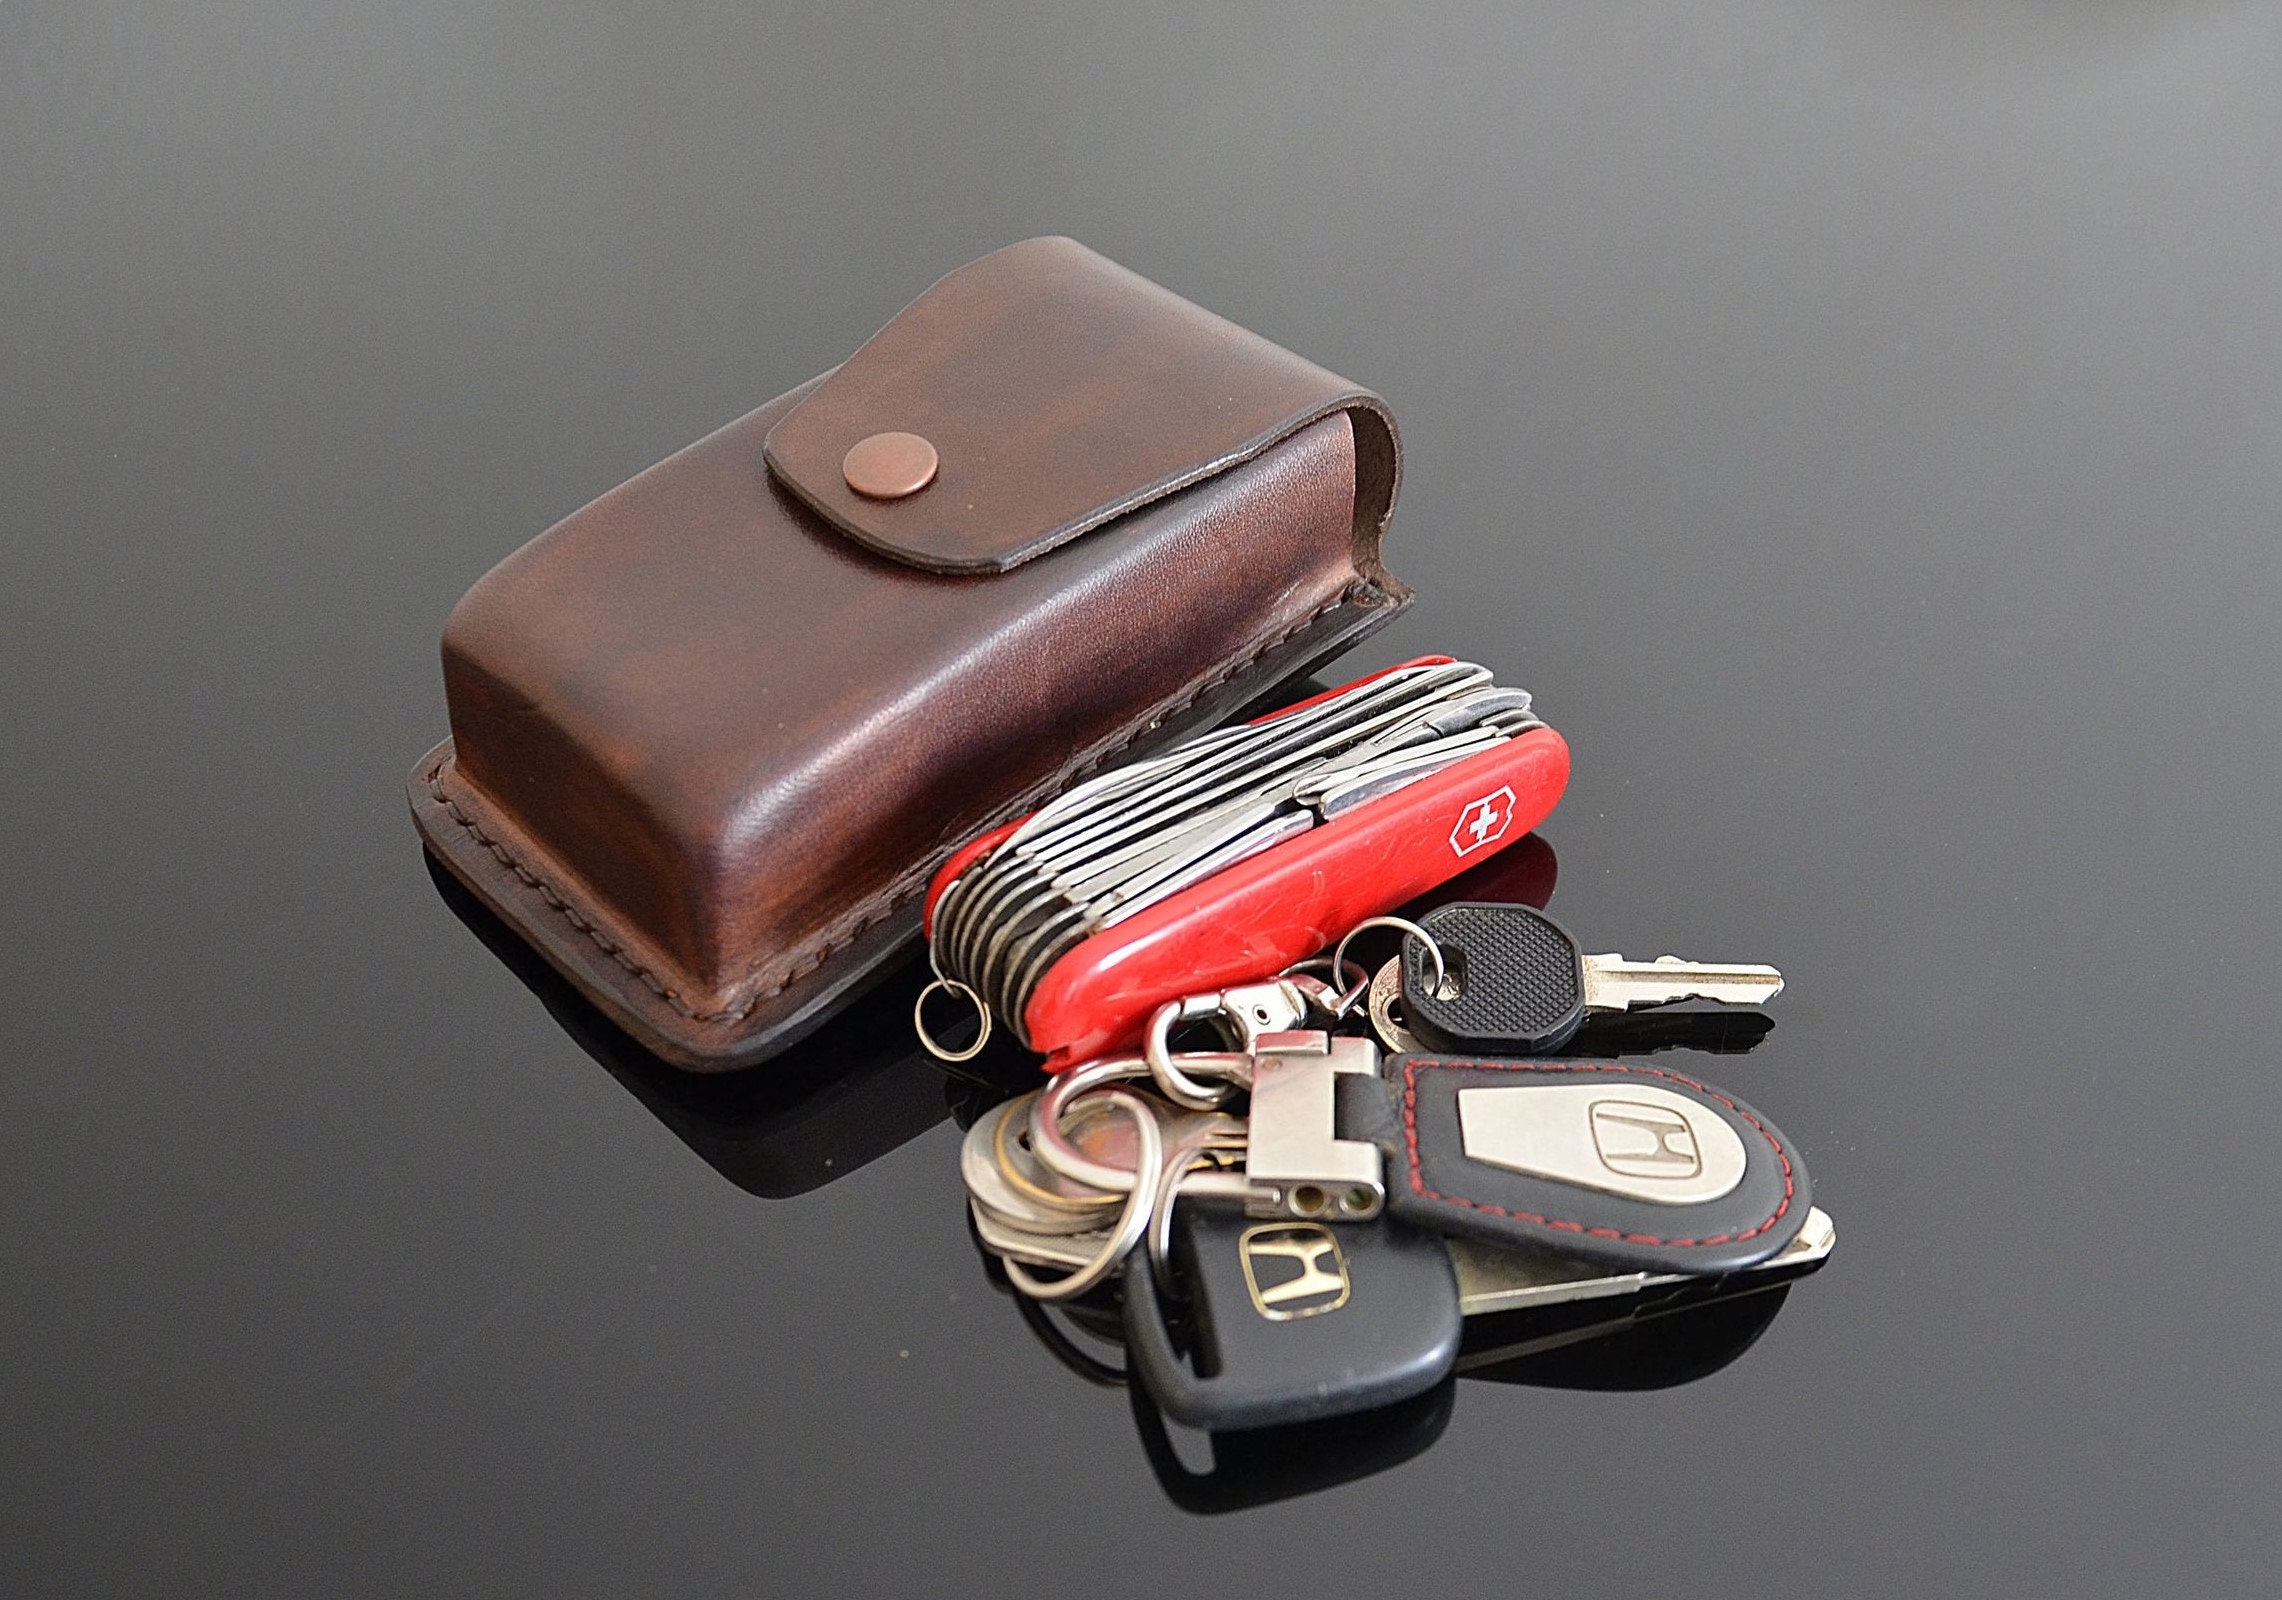 Recommendations for a Car Key Pouch/Case? : r/EDC